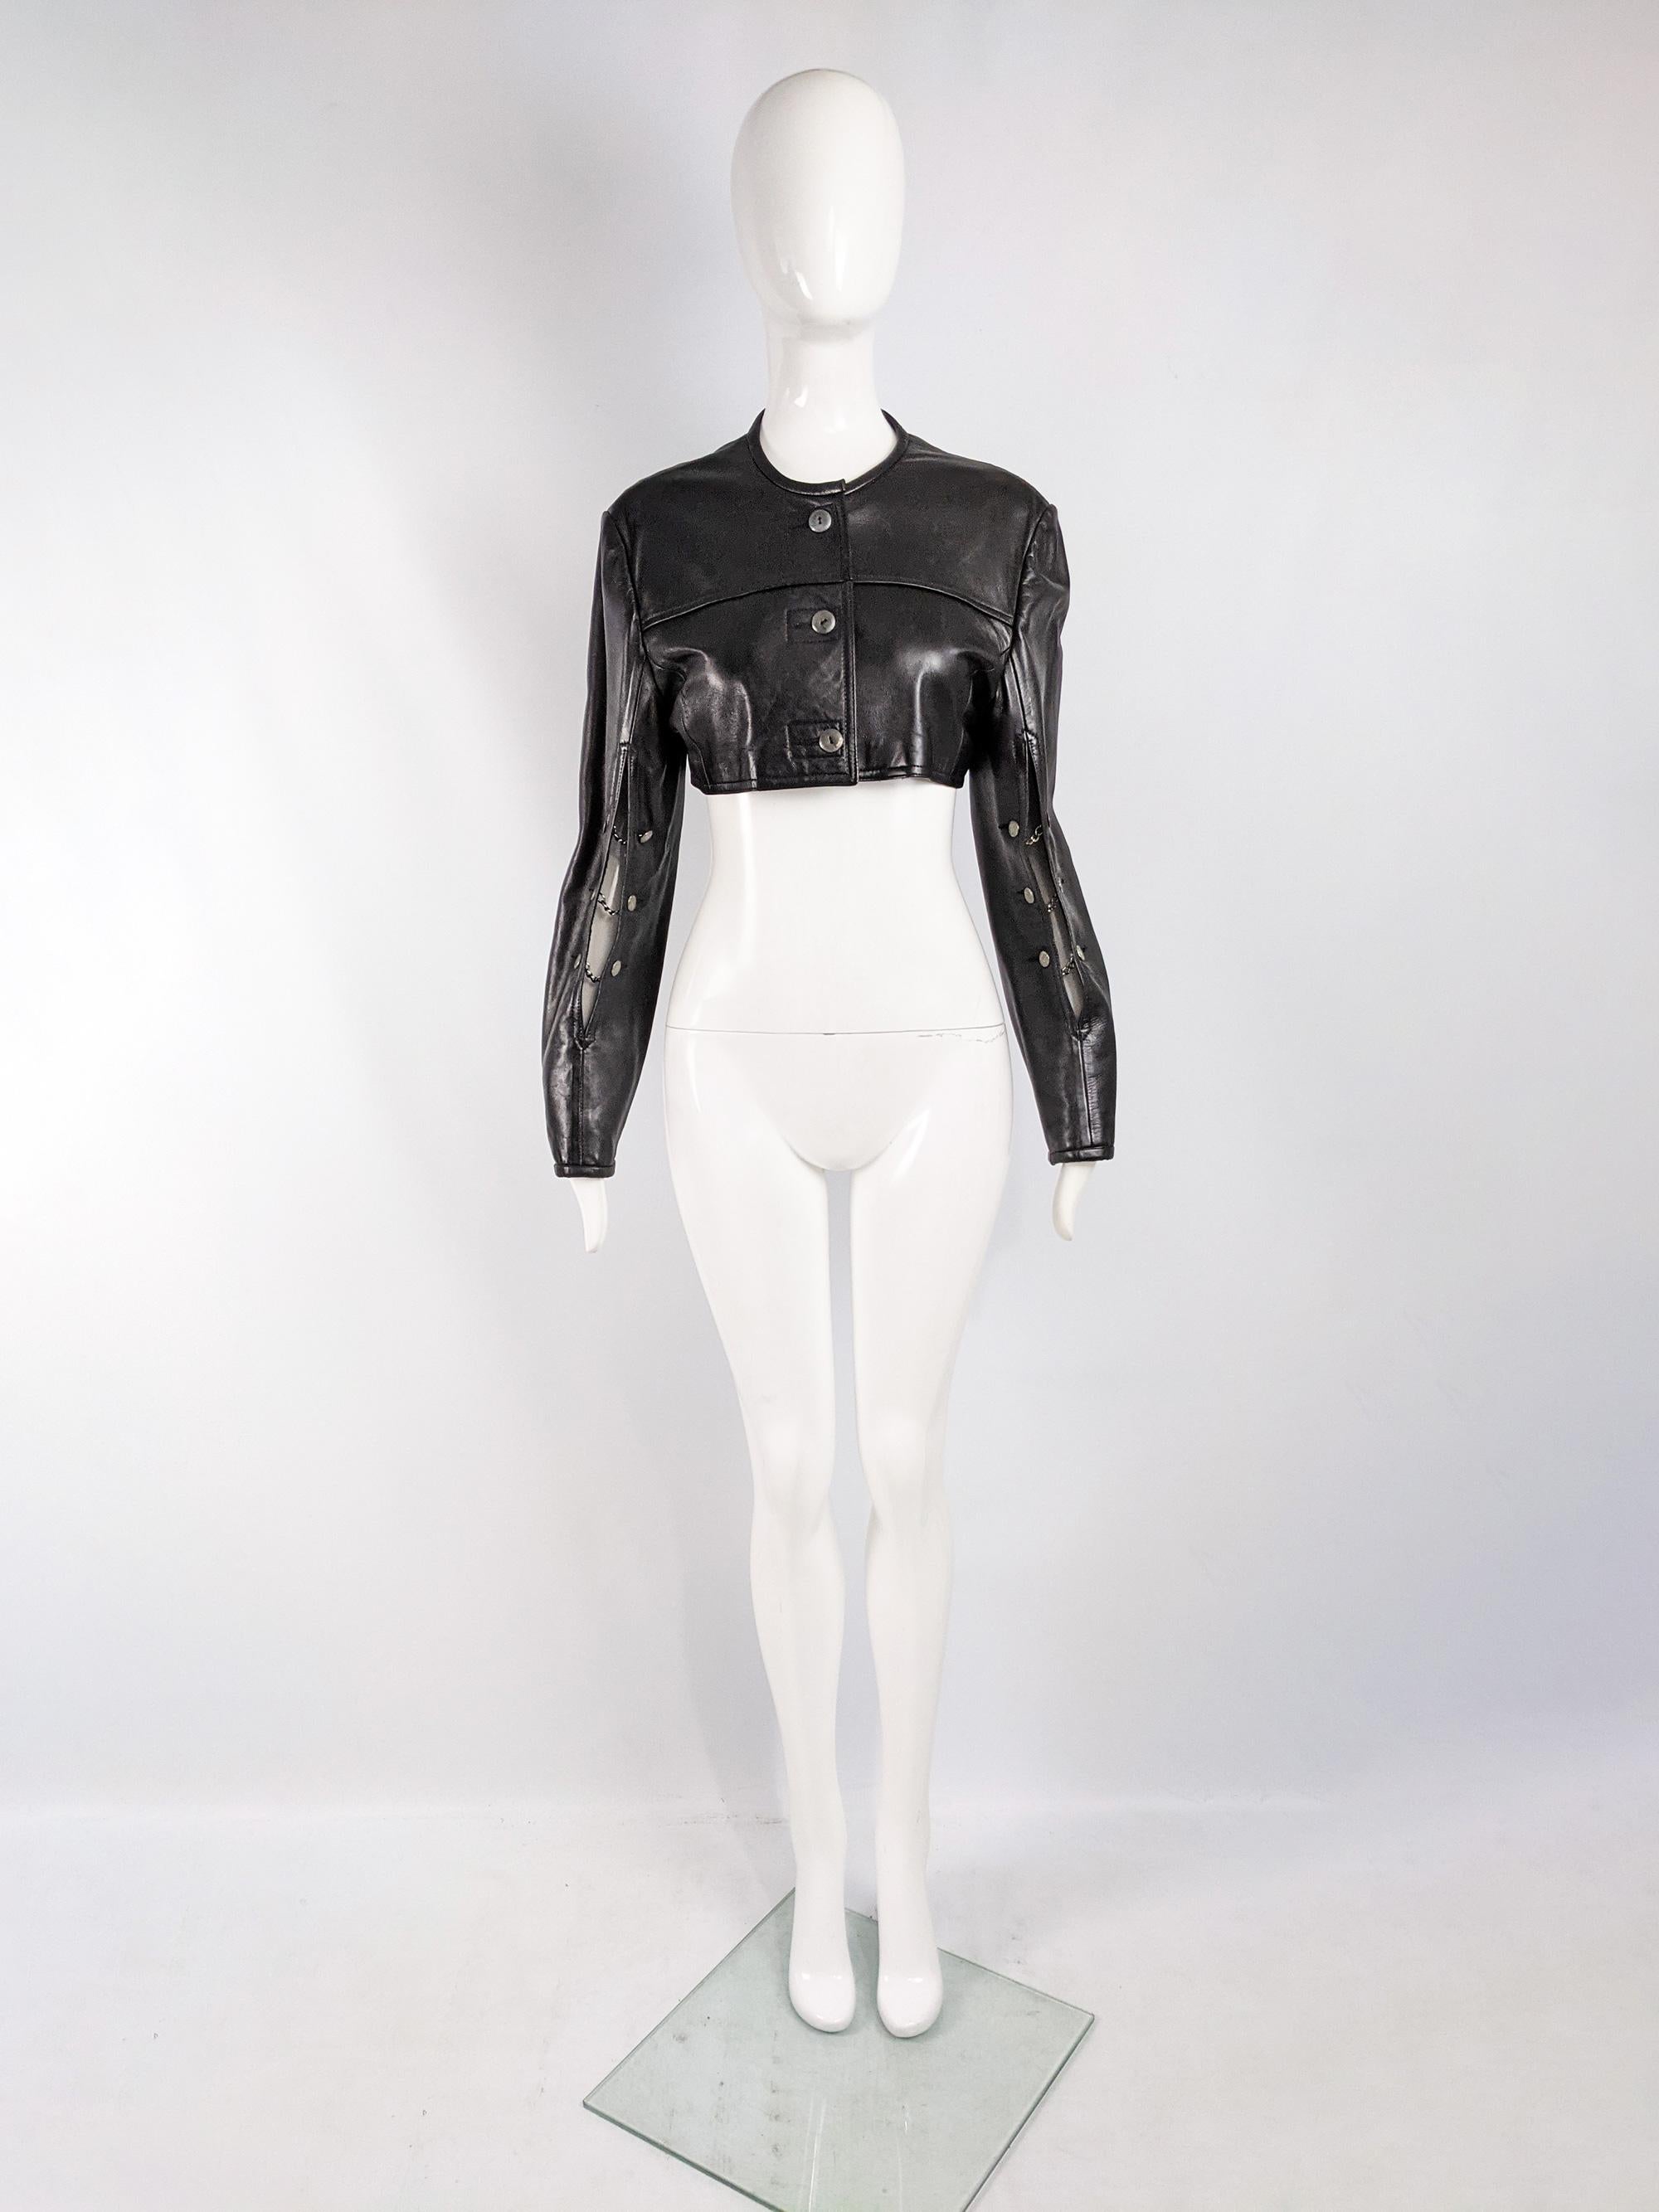 An ultra chic vintage womens John Richmond cropped leather jacket from the 90s in a black leather with open cut out details on the sleeves with chains in between giving a futuristic, minimalist look. 

Size: Marked vintage UK 12 but measures more